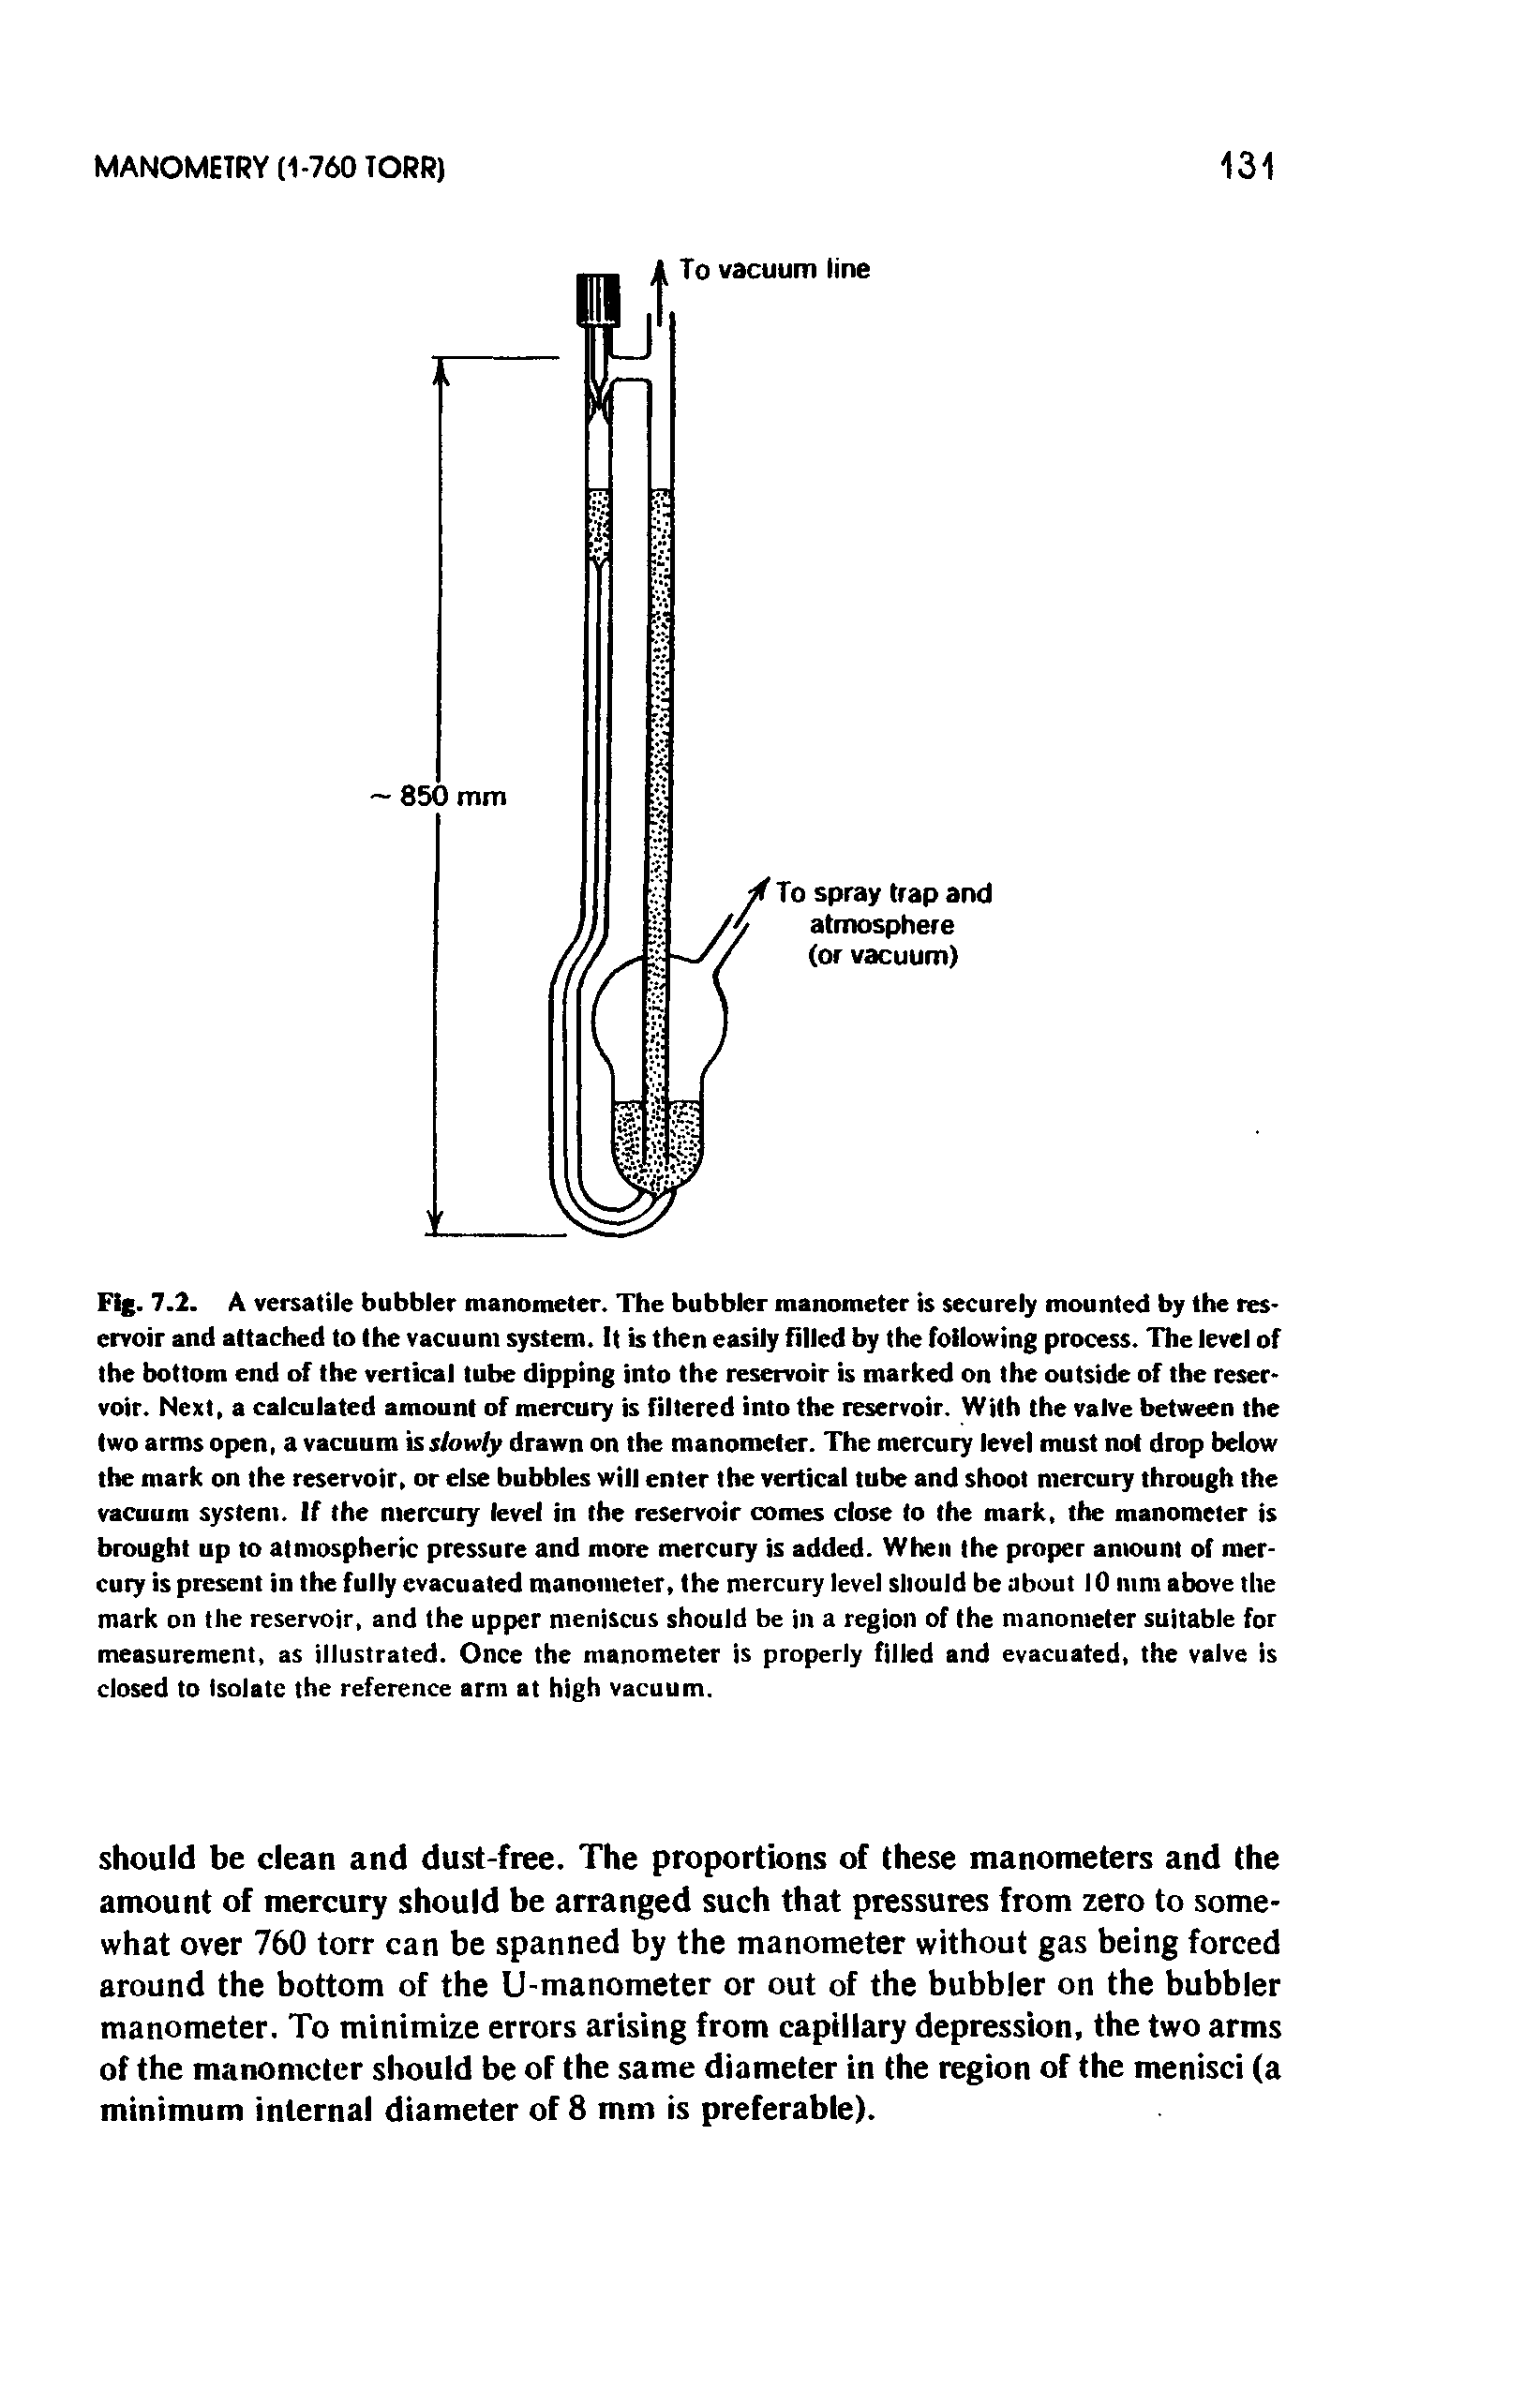 Fig. 7.2. A versatile bubbler manometer. The bubbler manometer Is securely mounted by the reservoir and attached to the vacuum system. It is then easily filled by the following process. The level of the bottom end of the vertical tube dipping into the reservoir is marked on the outside of the reservoir. Next, a calculated amount of mercury is filtered into the reservoir. With the valve between the two arms open, a vacuum is slowly drawn on the manometer. The mercury level must not drop below the mark on the reservoir, or else bubbles will enter the vertical tube and shoot mercury through the vacuum system. If the mercury level in the reservoir comes close to the mark, the manometer is brought up to atmospheric pressure and more mercury is added. When the proper amount of mercury is present in the fully evacuated manometer, the mercury level should be about 10 mm above the mark on the reservoir, and the upper meniscus should be in a region of the manometer suitable for measurement, as illustrated. Once the manometer is properly filled and evacuated, the valve is closed to isolate the reference arm at high vacuum.